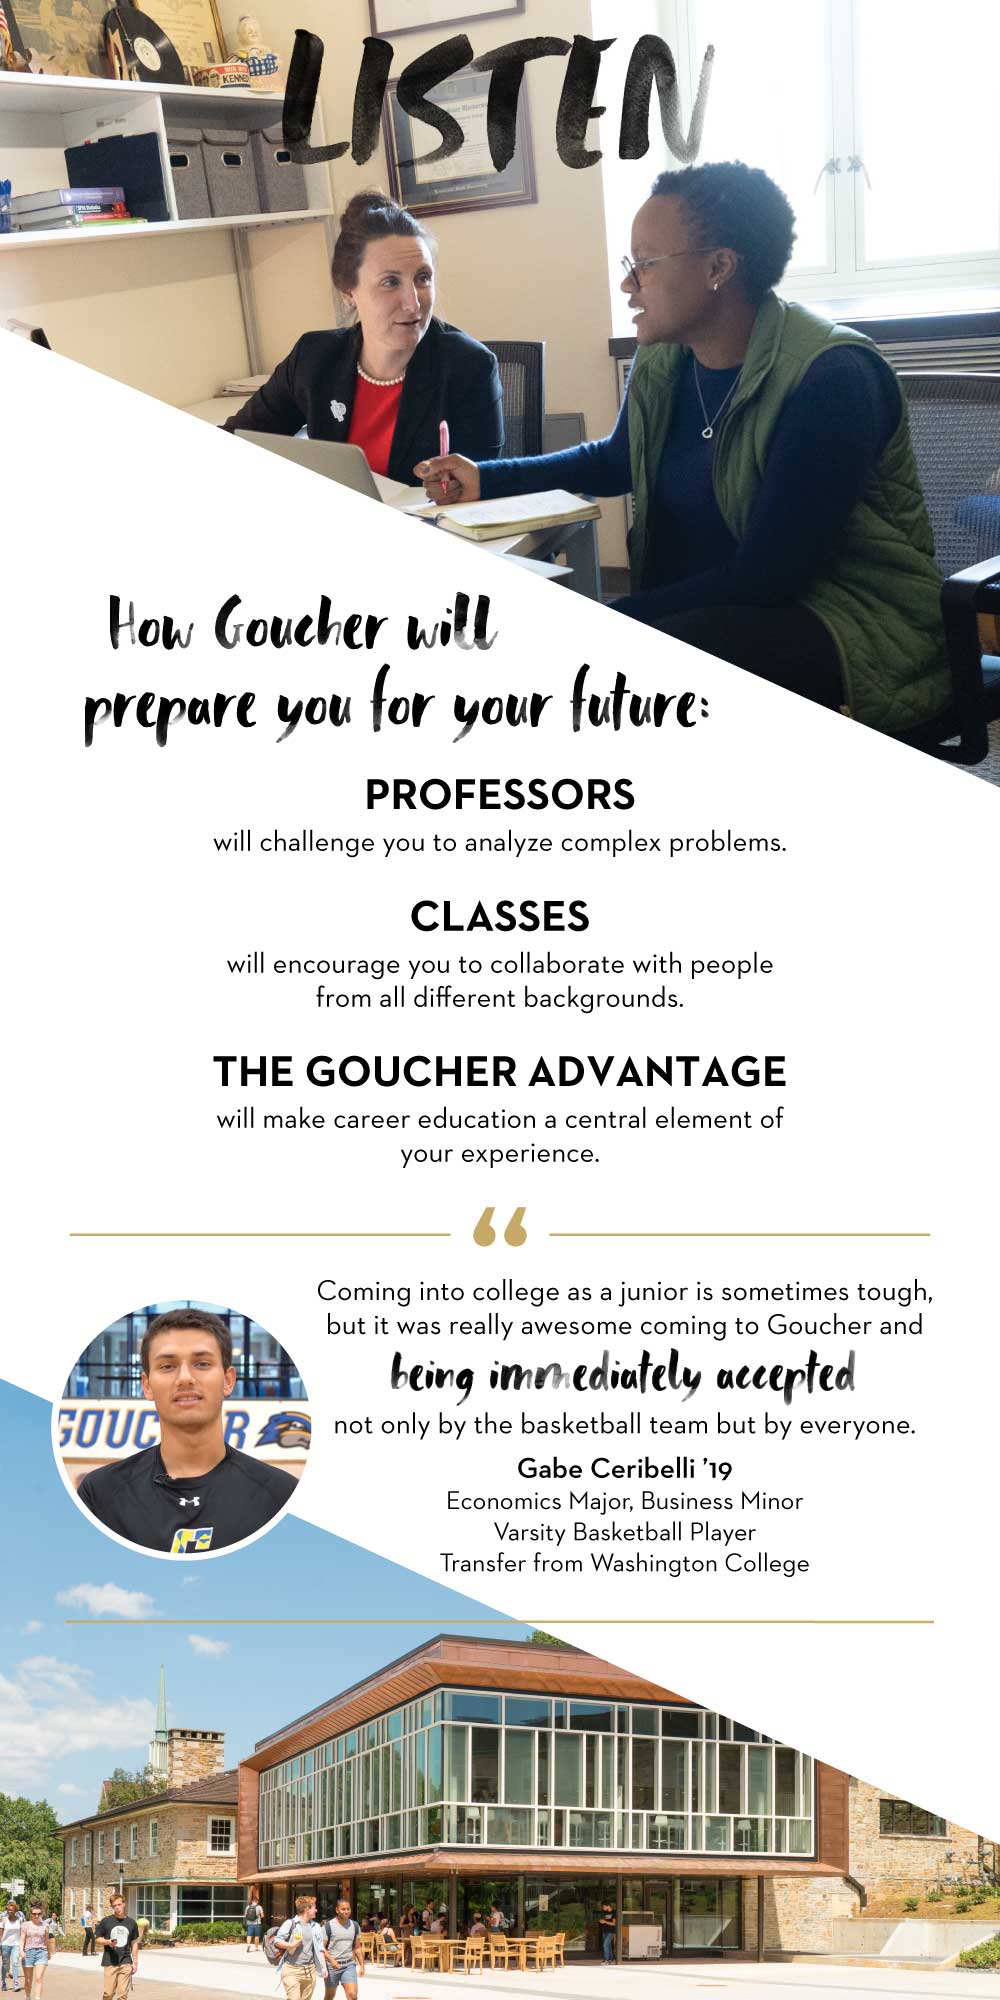 how Goucher will prepare you for your future college: professors, classes, the goucher advantage